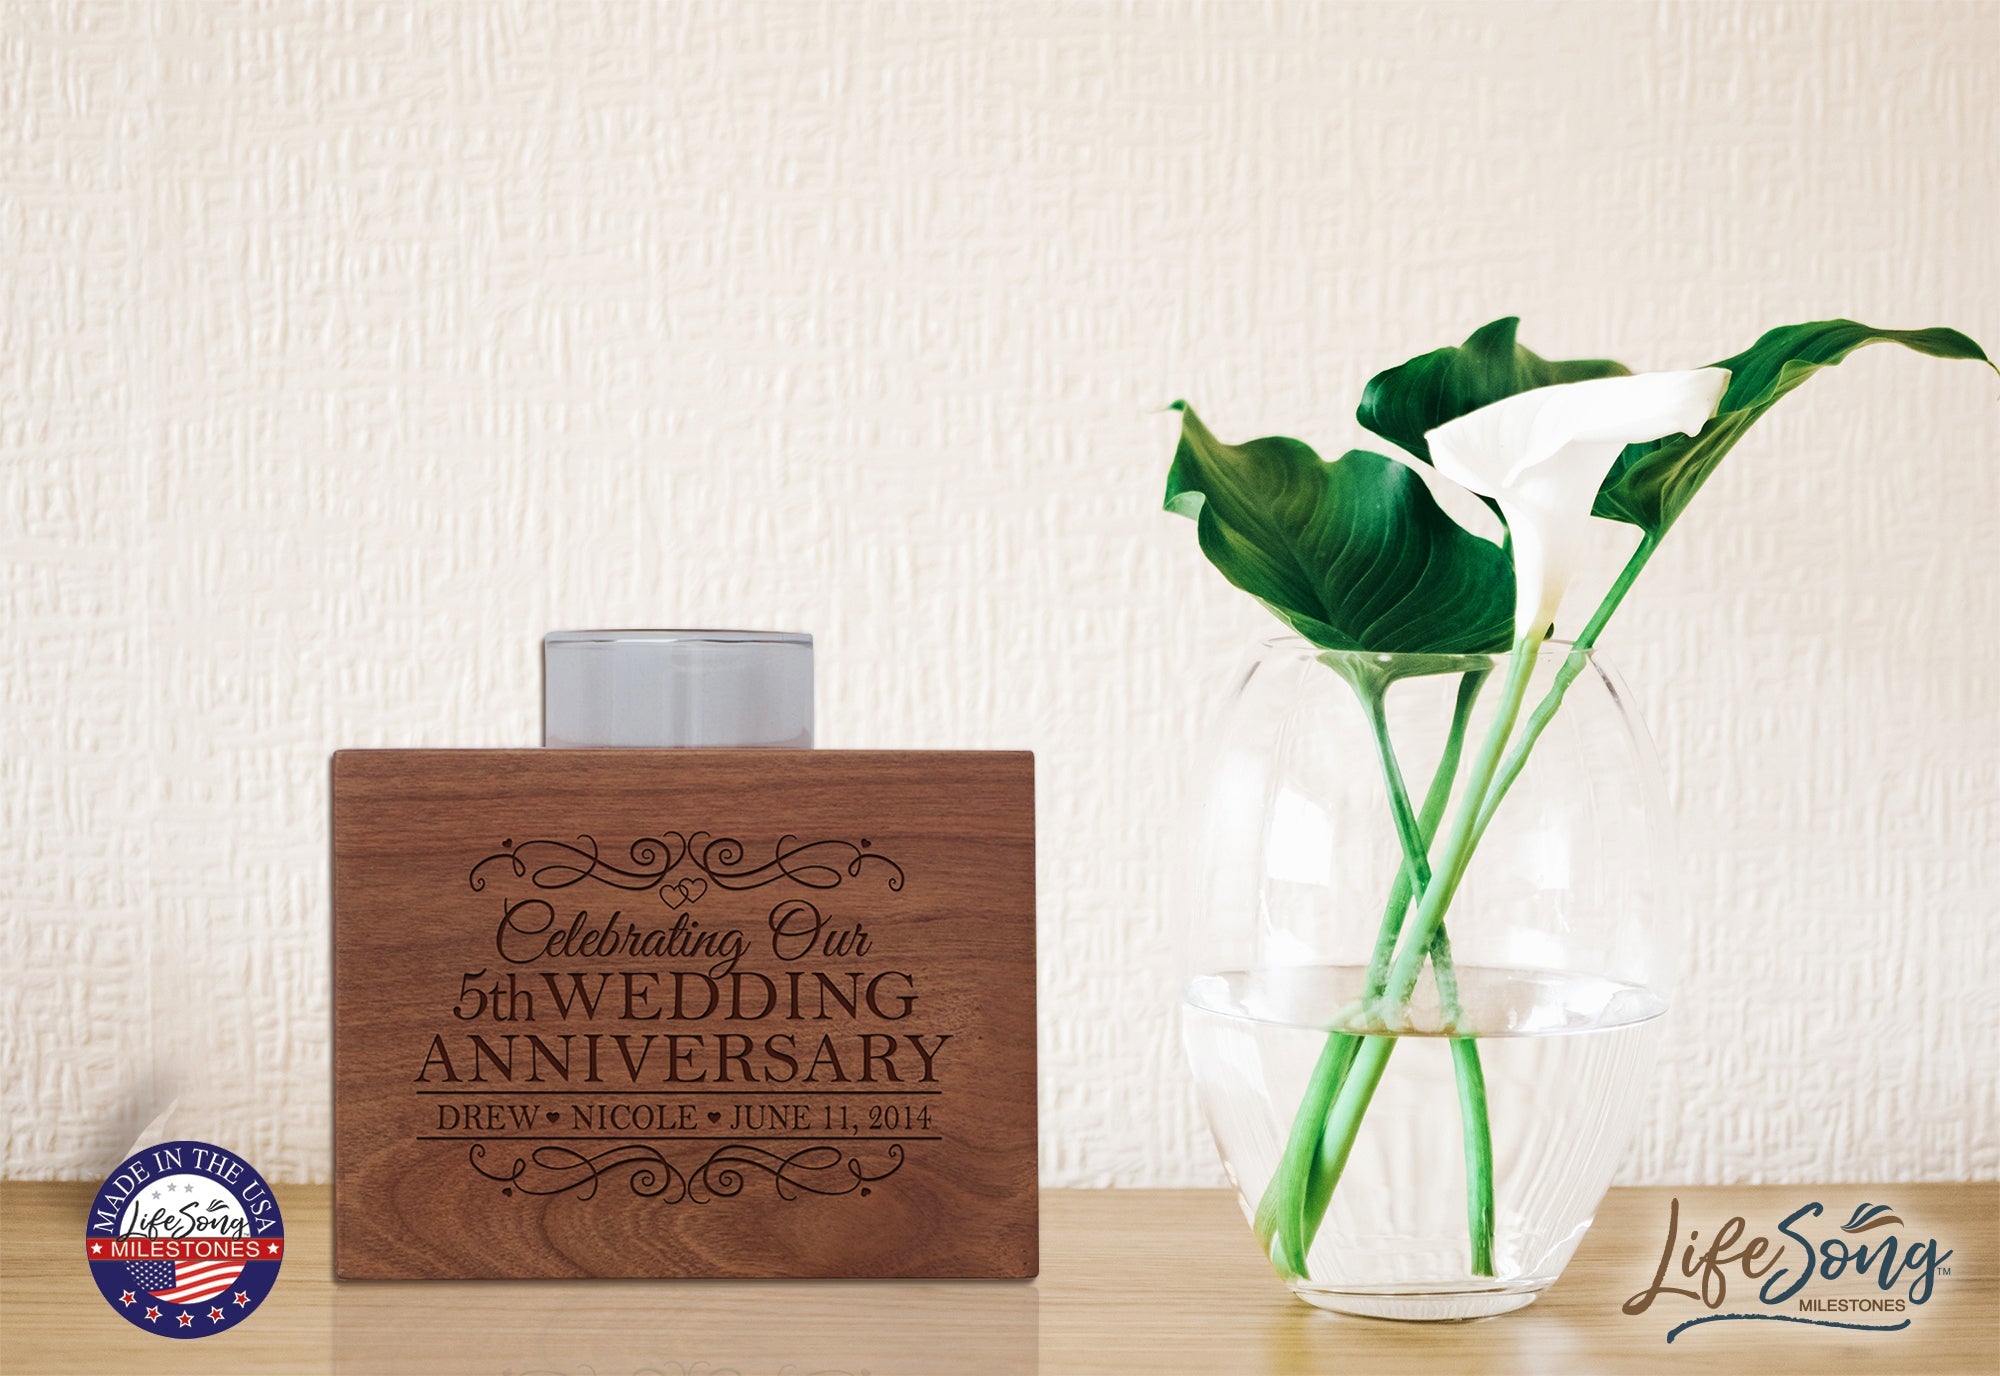 Personalized Cherry Wood Single Votive Candle Holder - 5th Wedding Anniversary - LifeSong Milestones